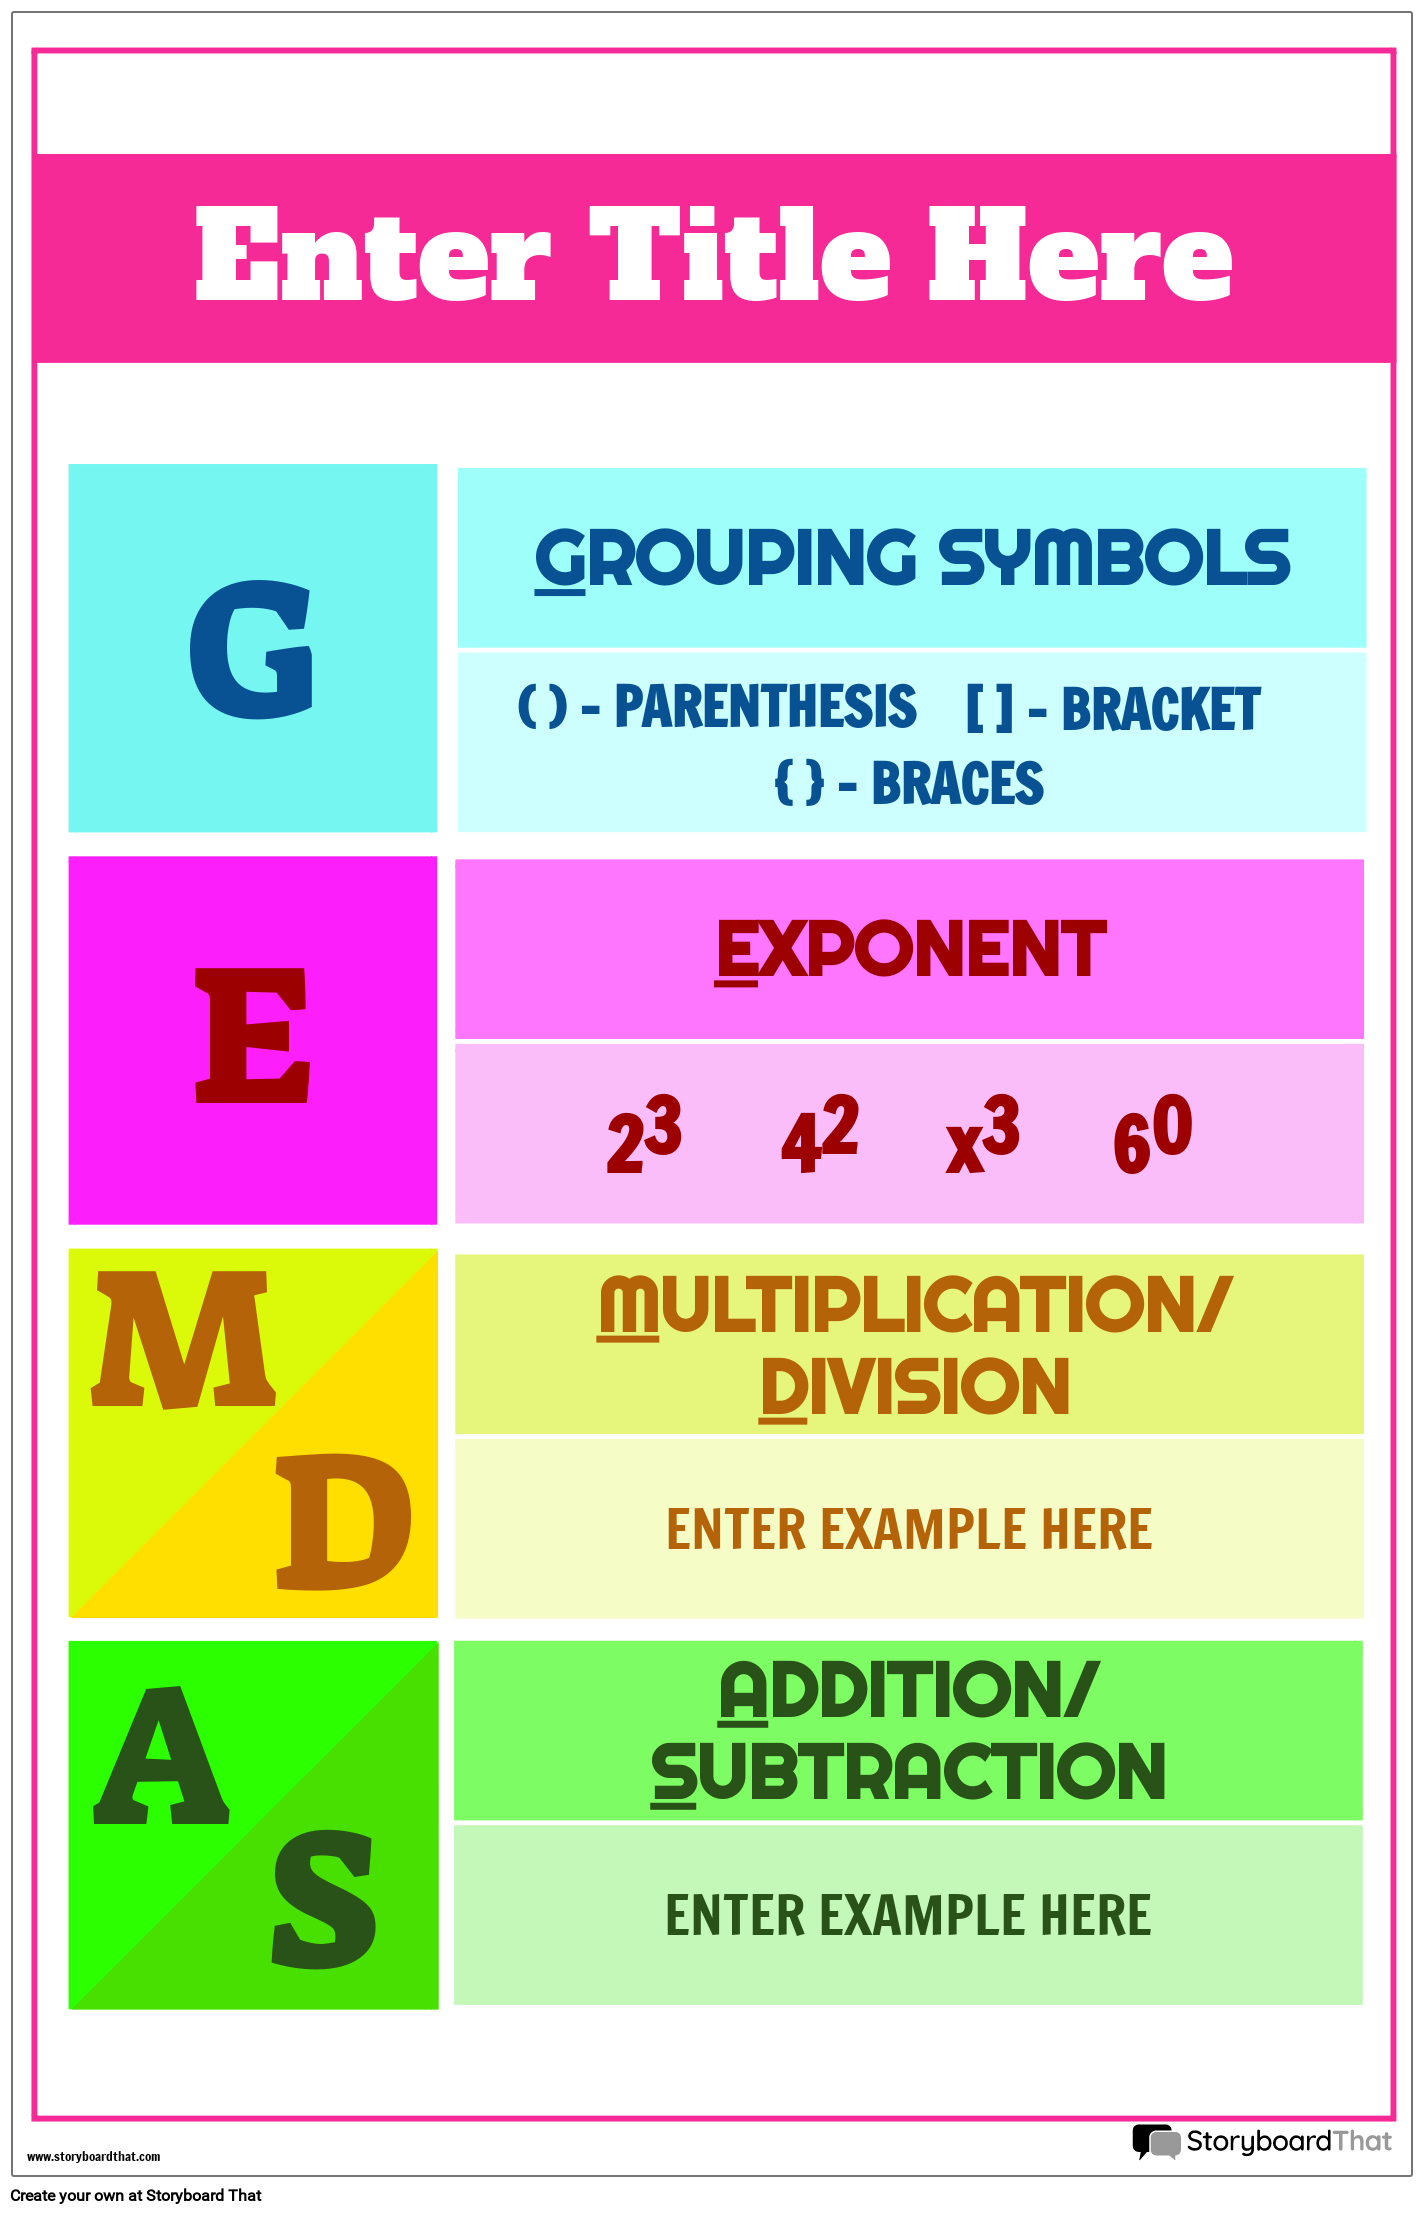 Simple Order of Operations Poster